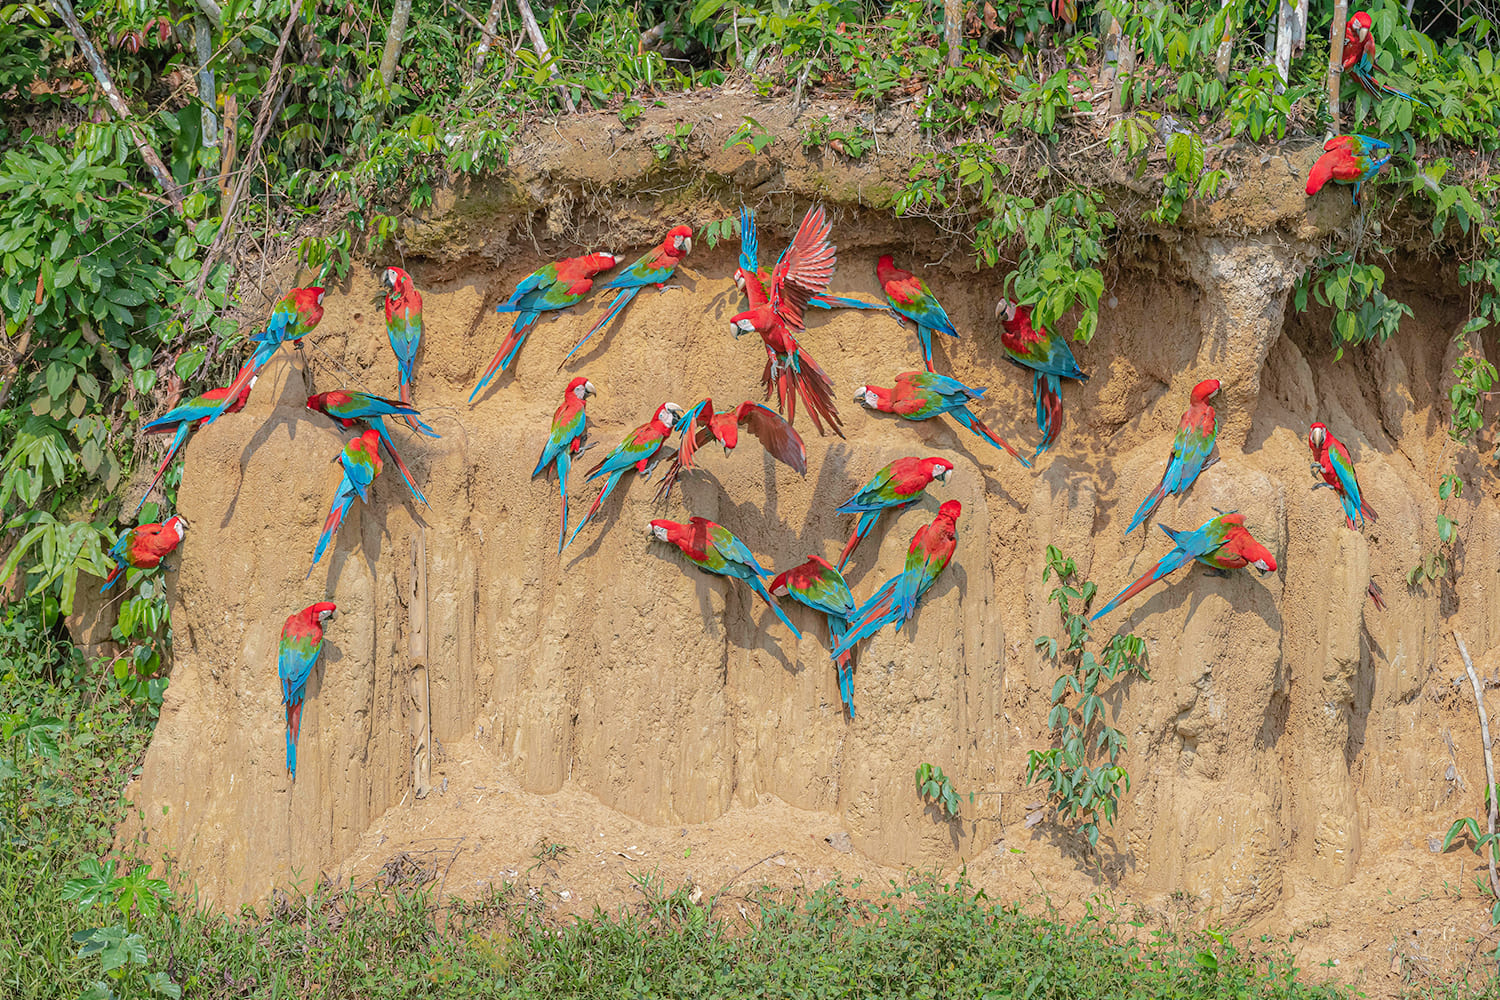 THE COLLPAS, THE HOUSE OF THE MACAWS